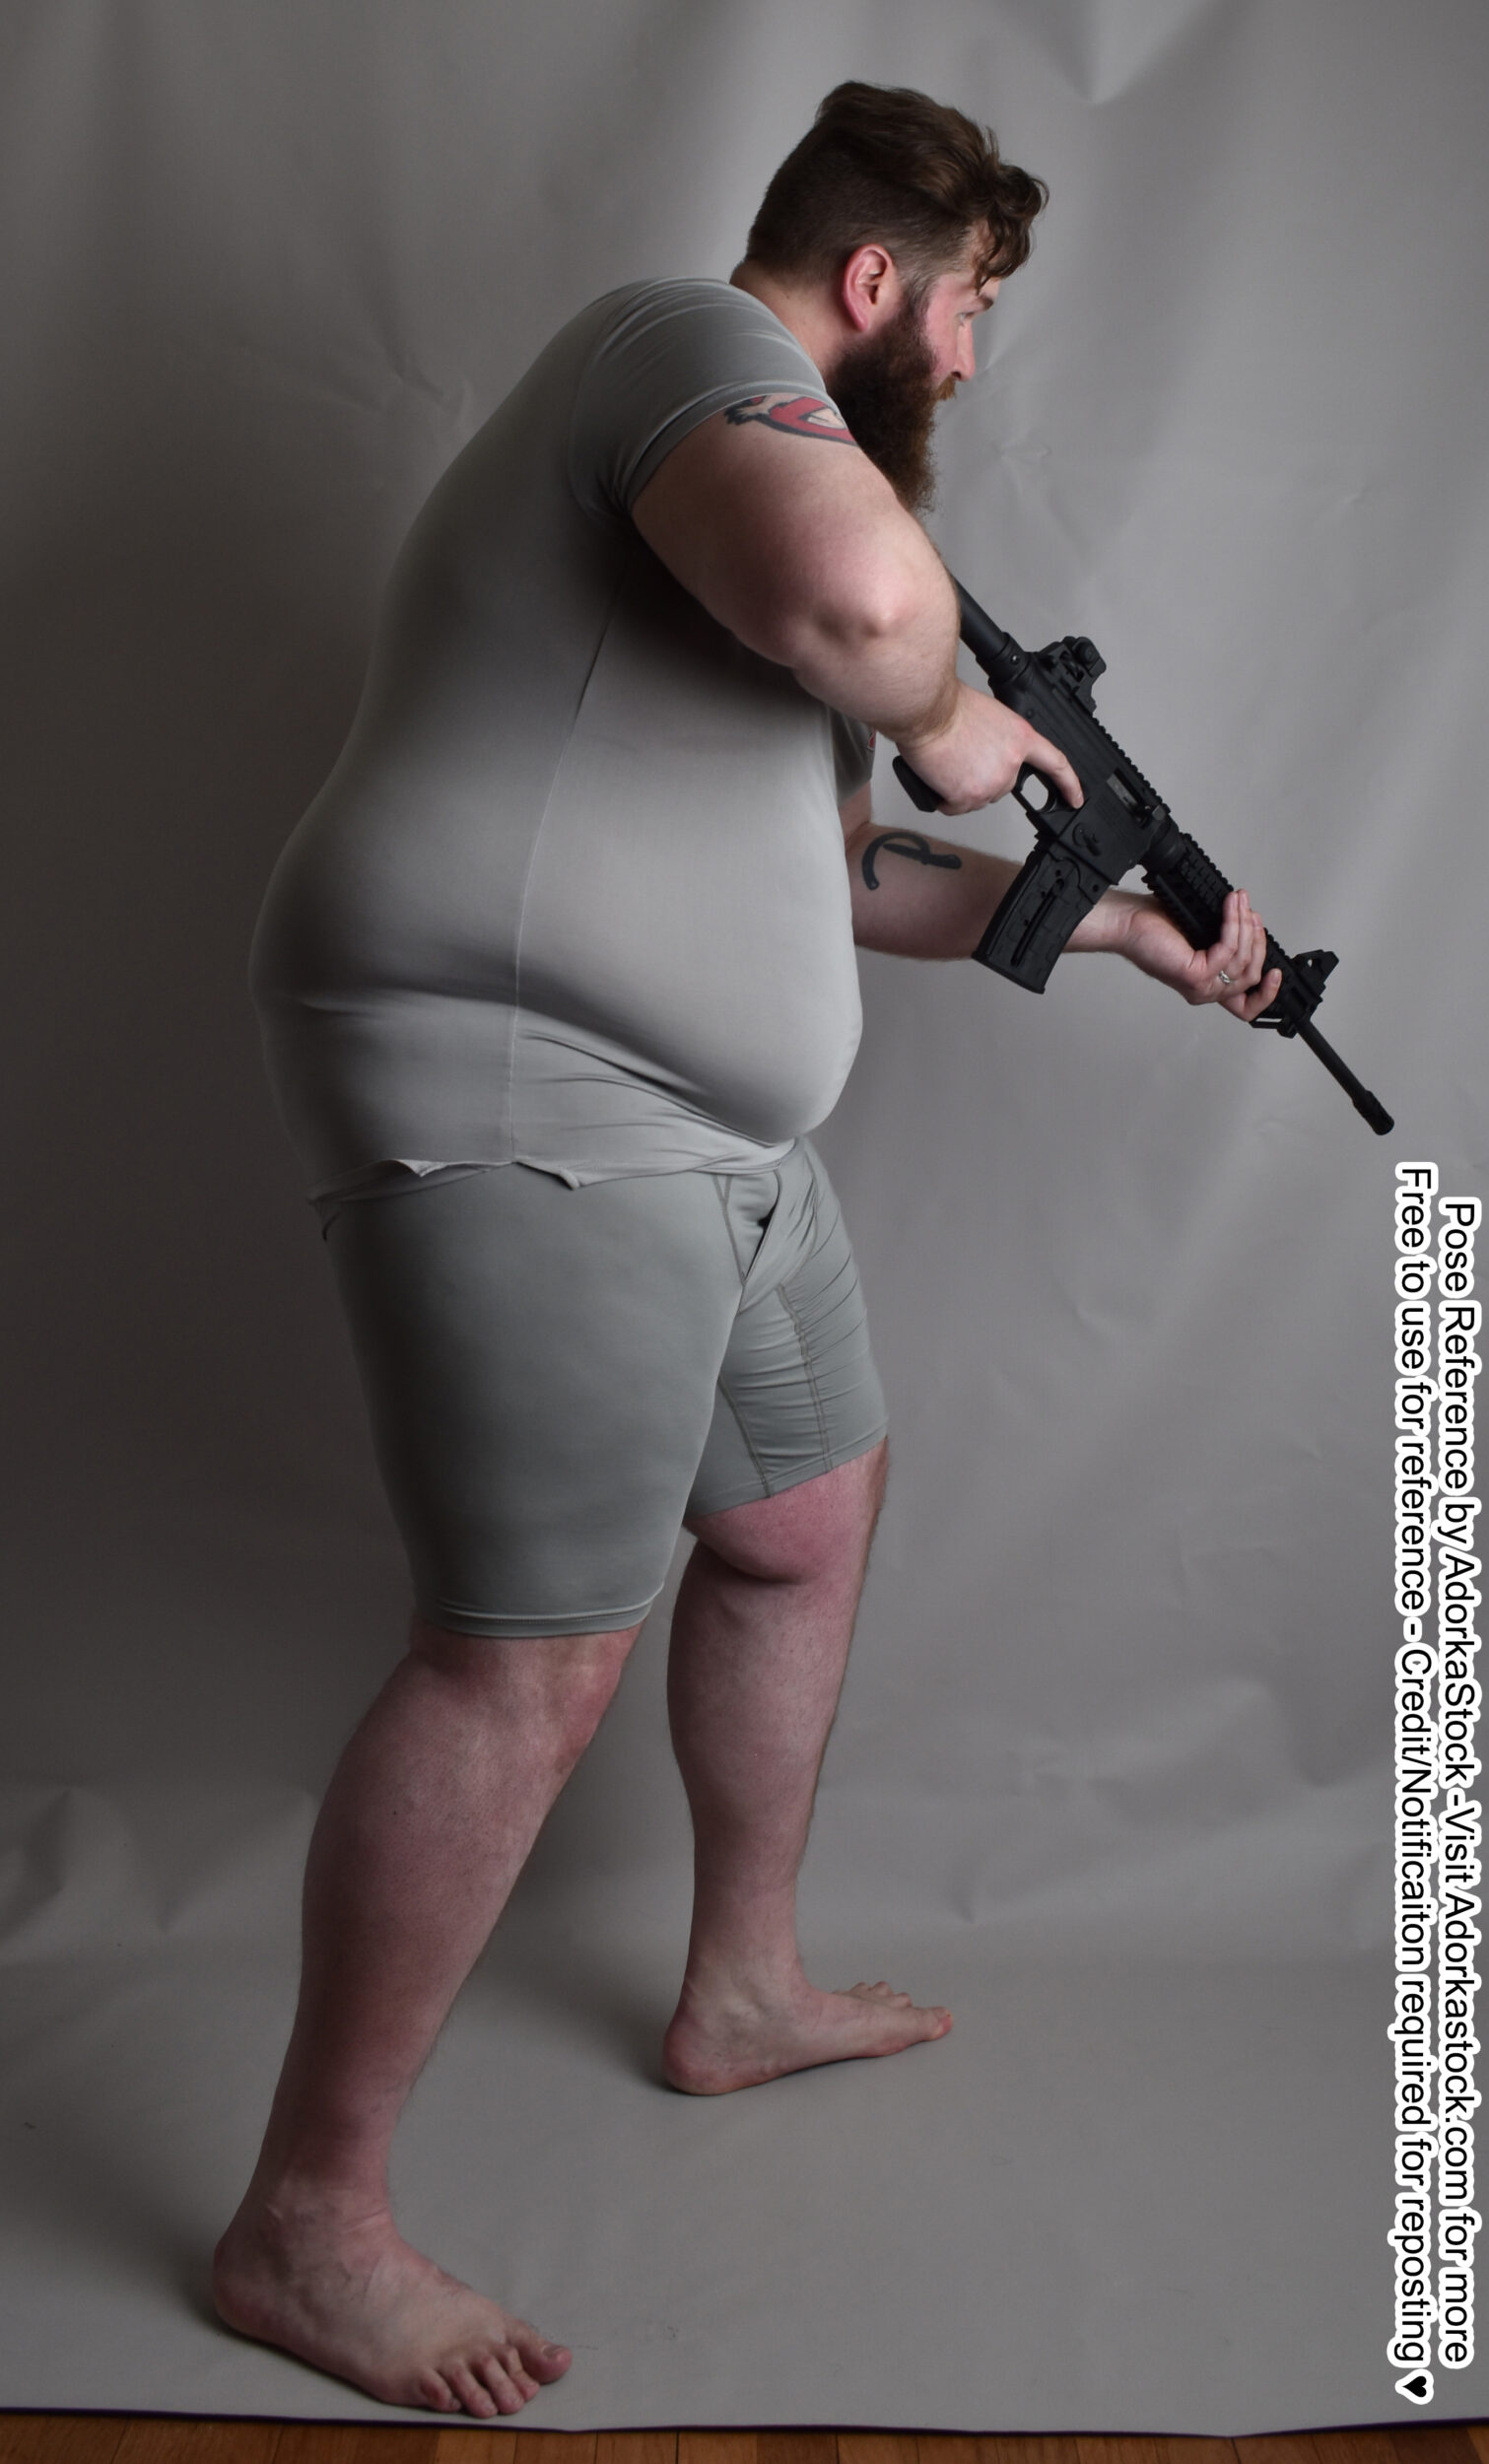 Fat, white, male pose reference model in back facing pose with a long gun.